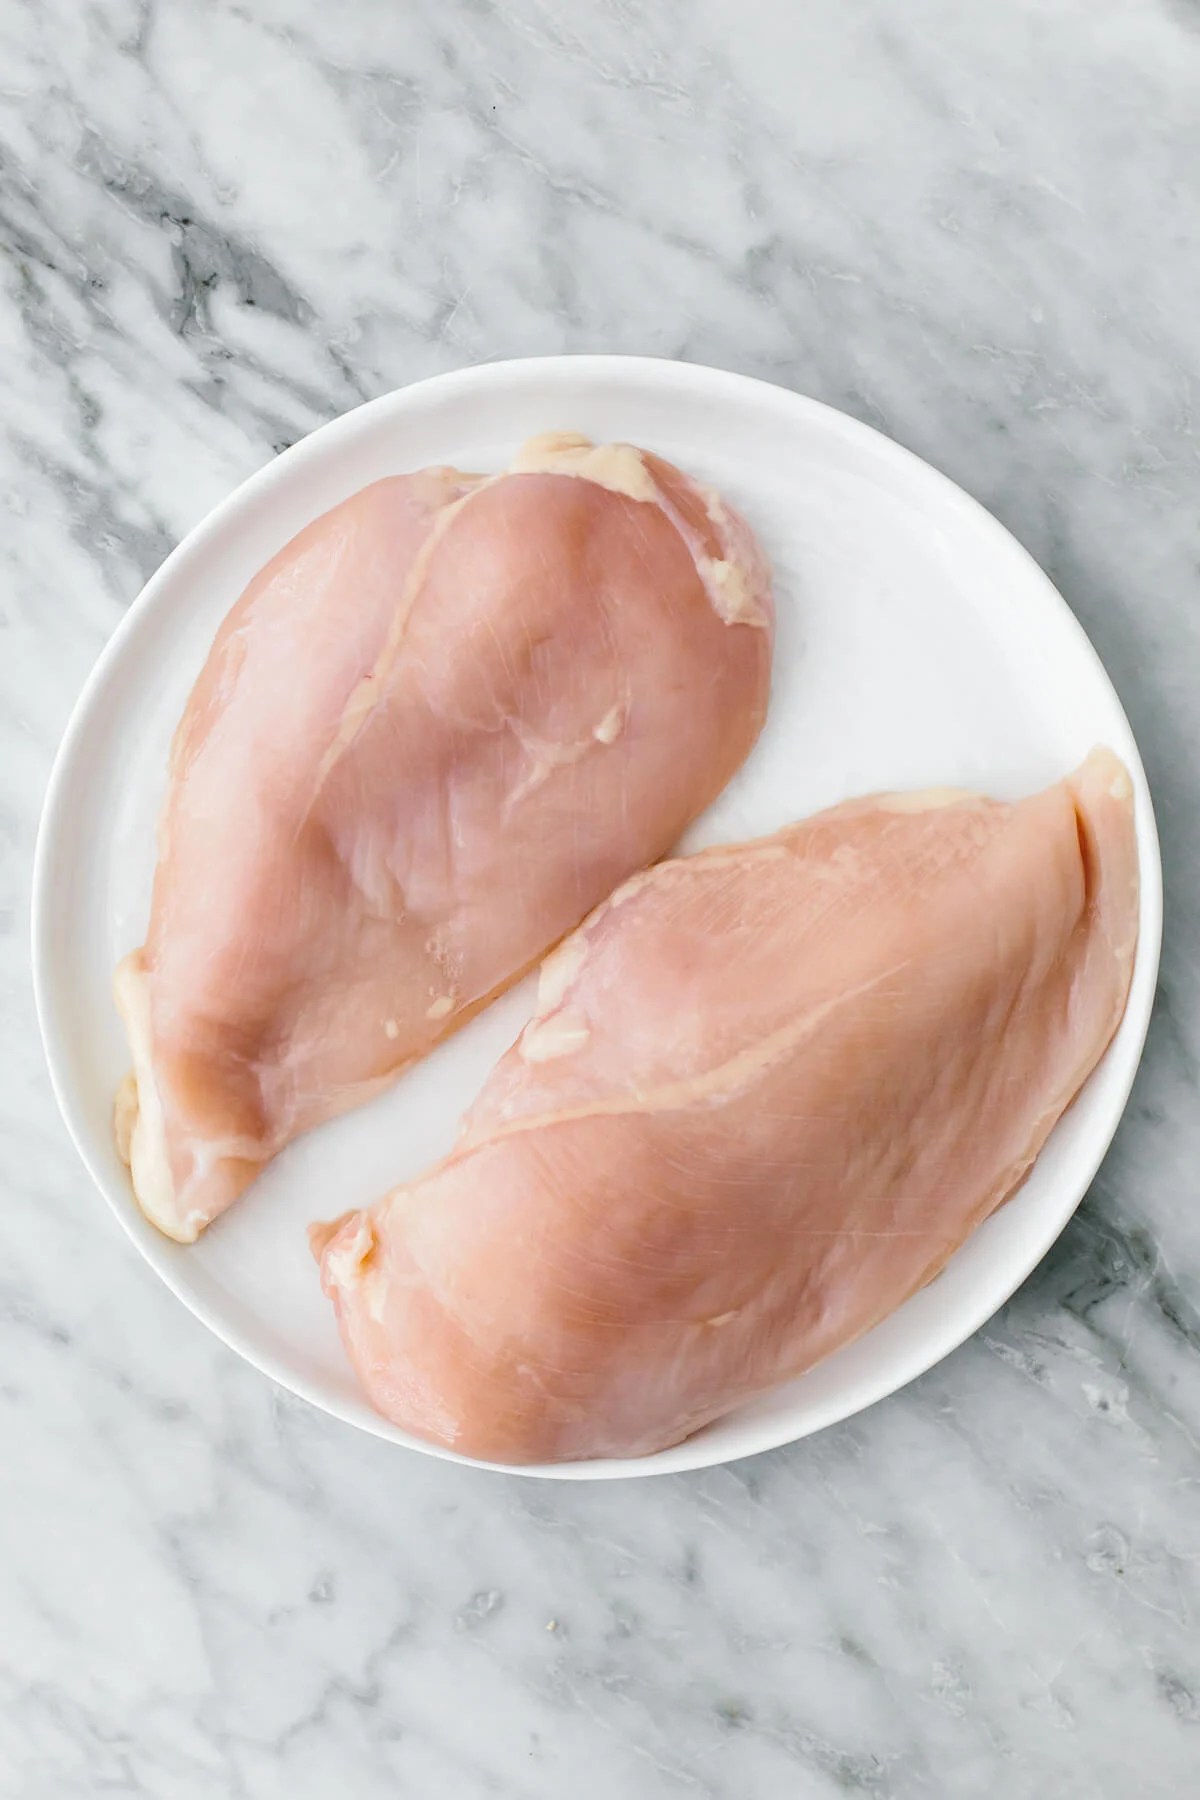 Raw chicken breasts on a plate for chicken marinades.